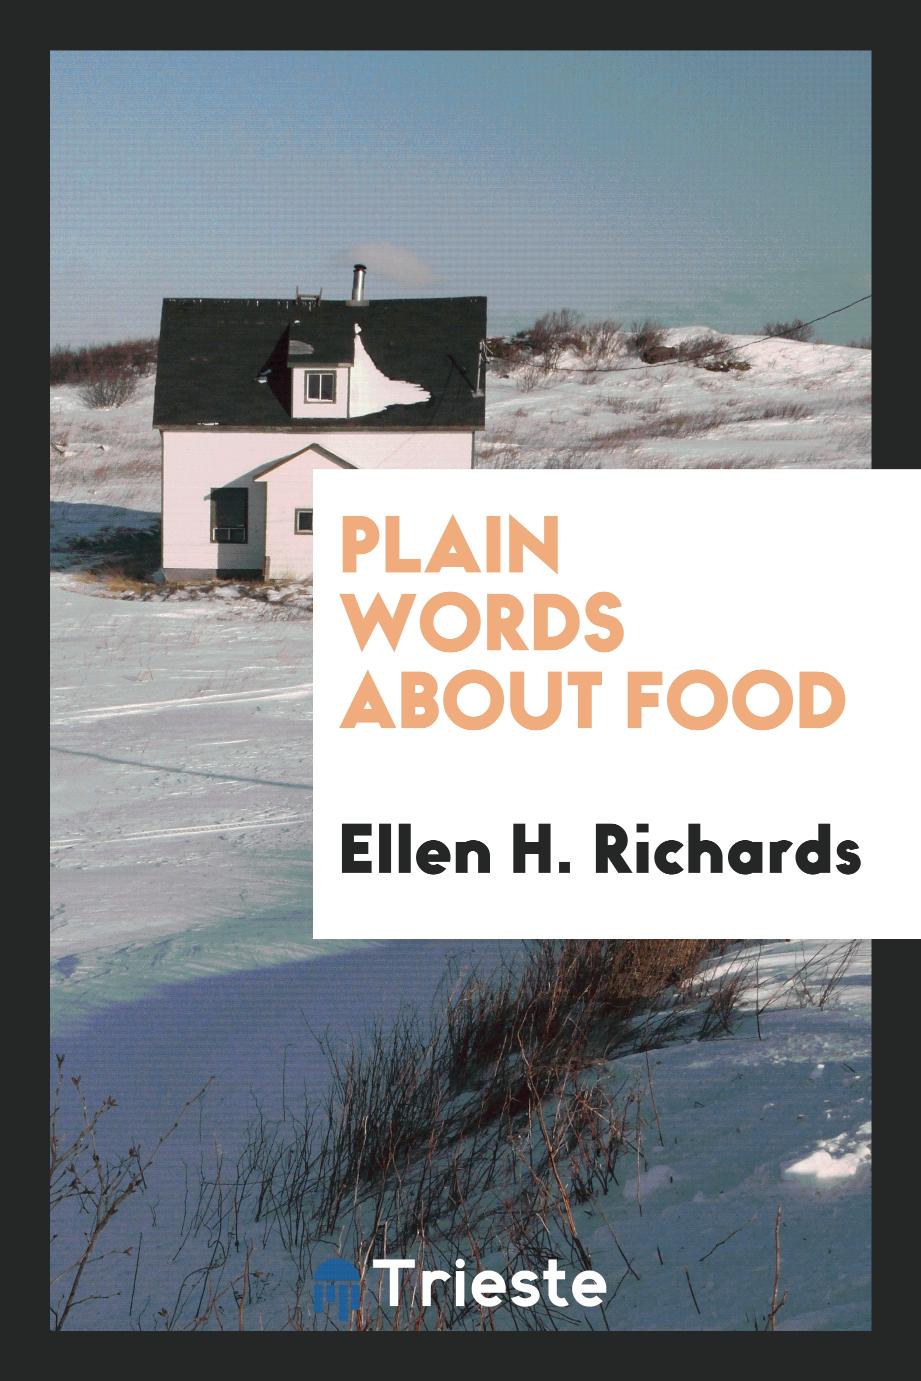 Plain words about food